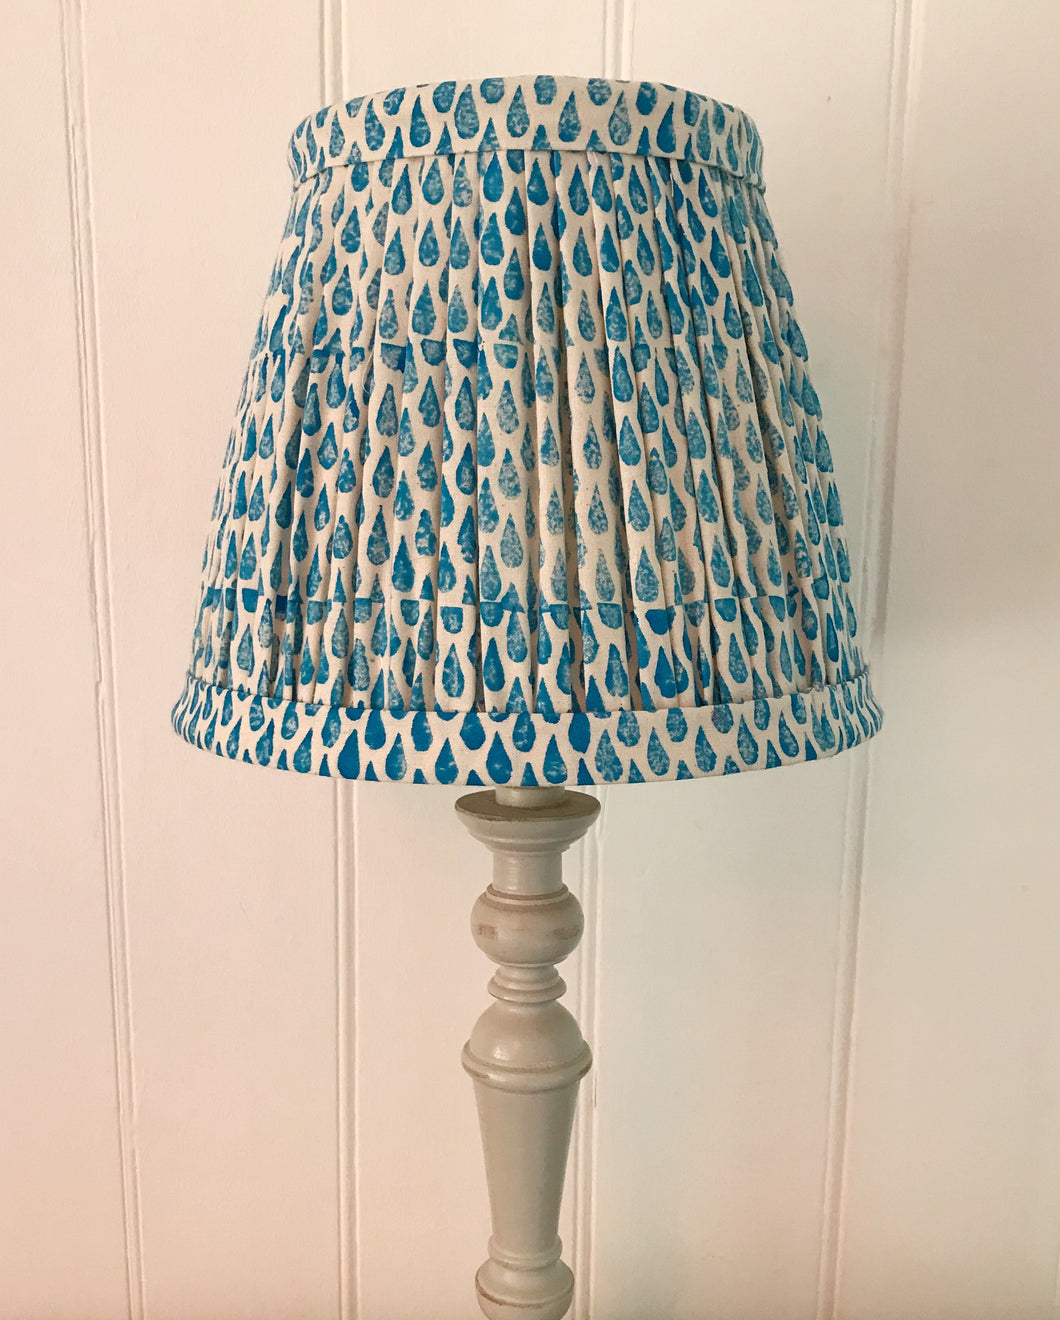 25cm Pleated Blue Lampshade - Hand Block Printed Blue